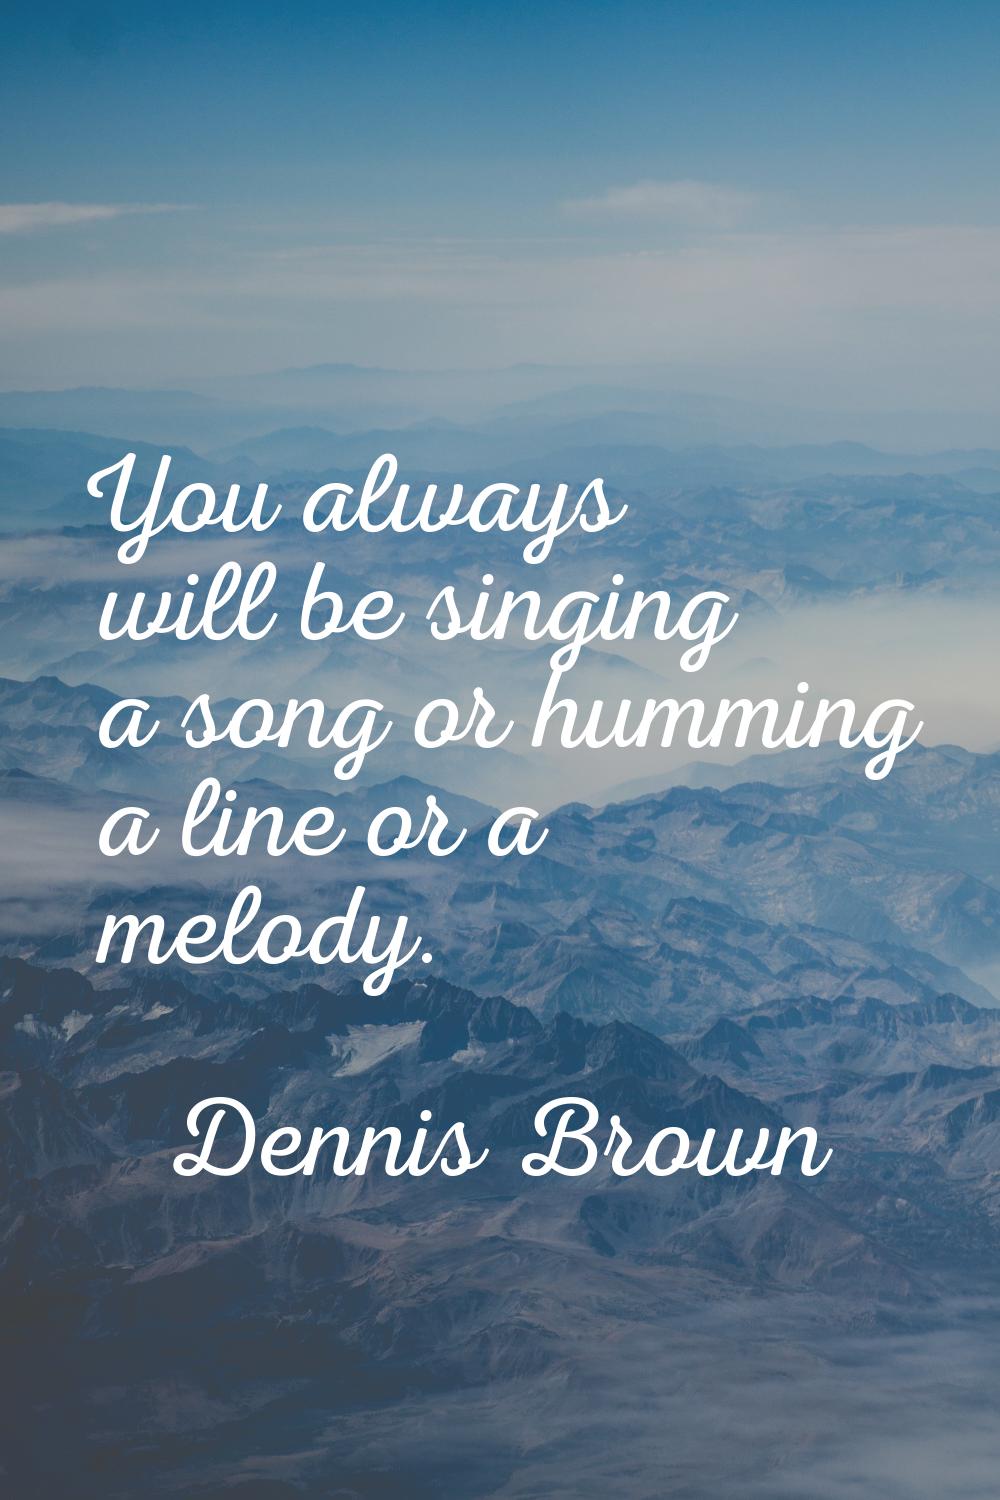 You always will be singing a song or humming a line or a melody.